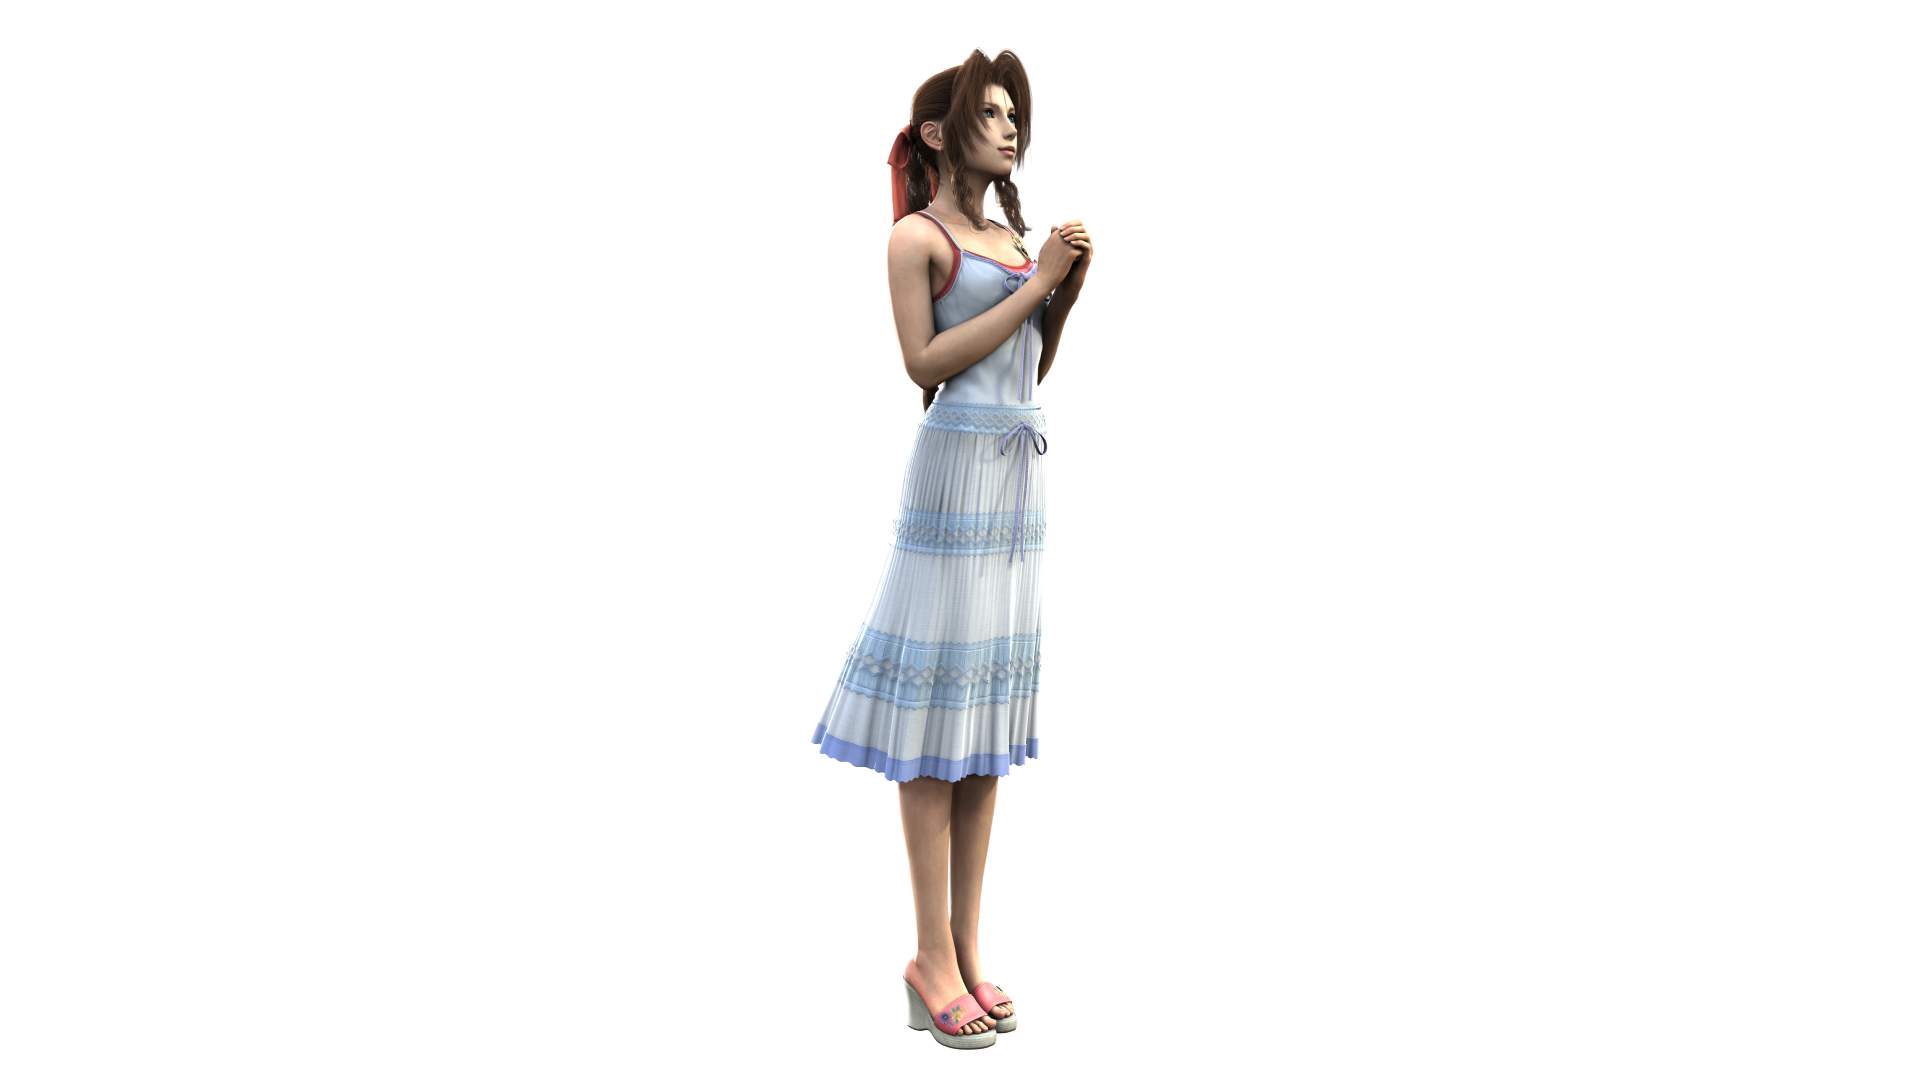 Aerith character rendering